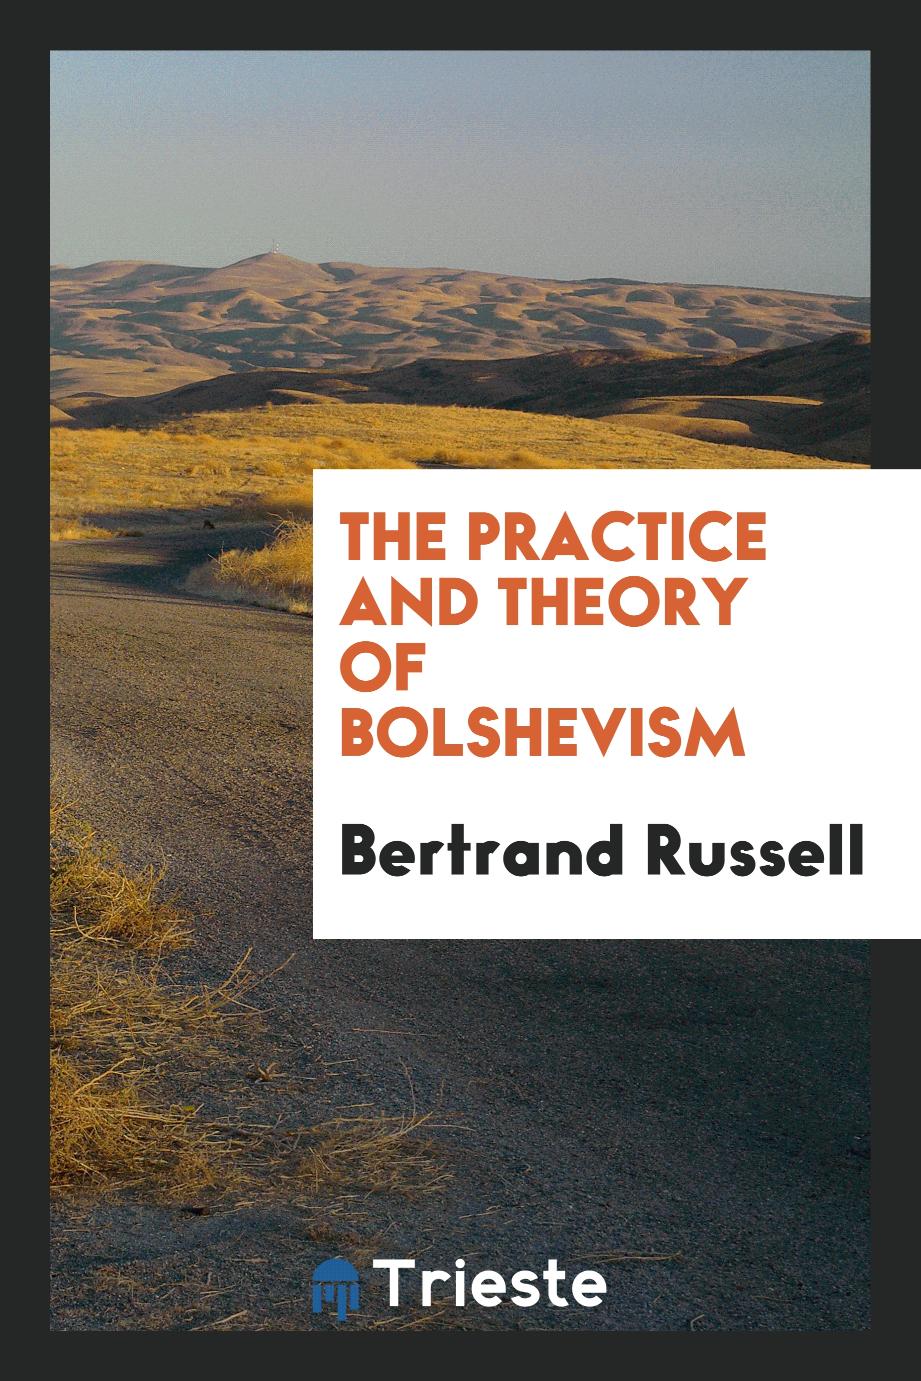 The practice and theory of Bolshevism